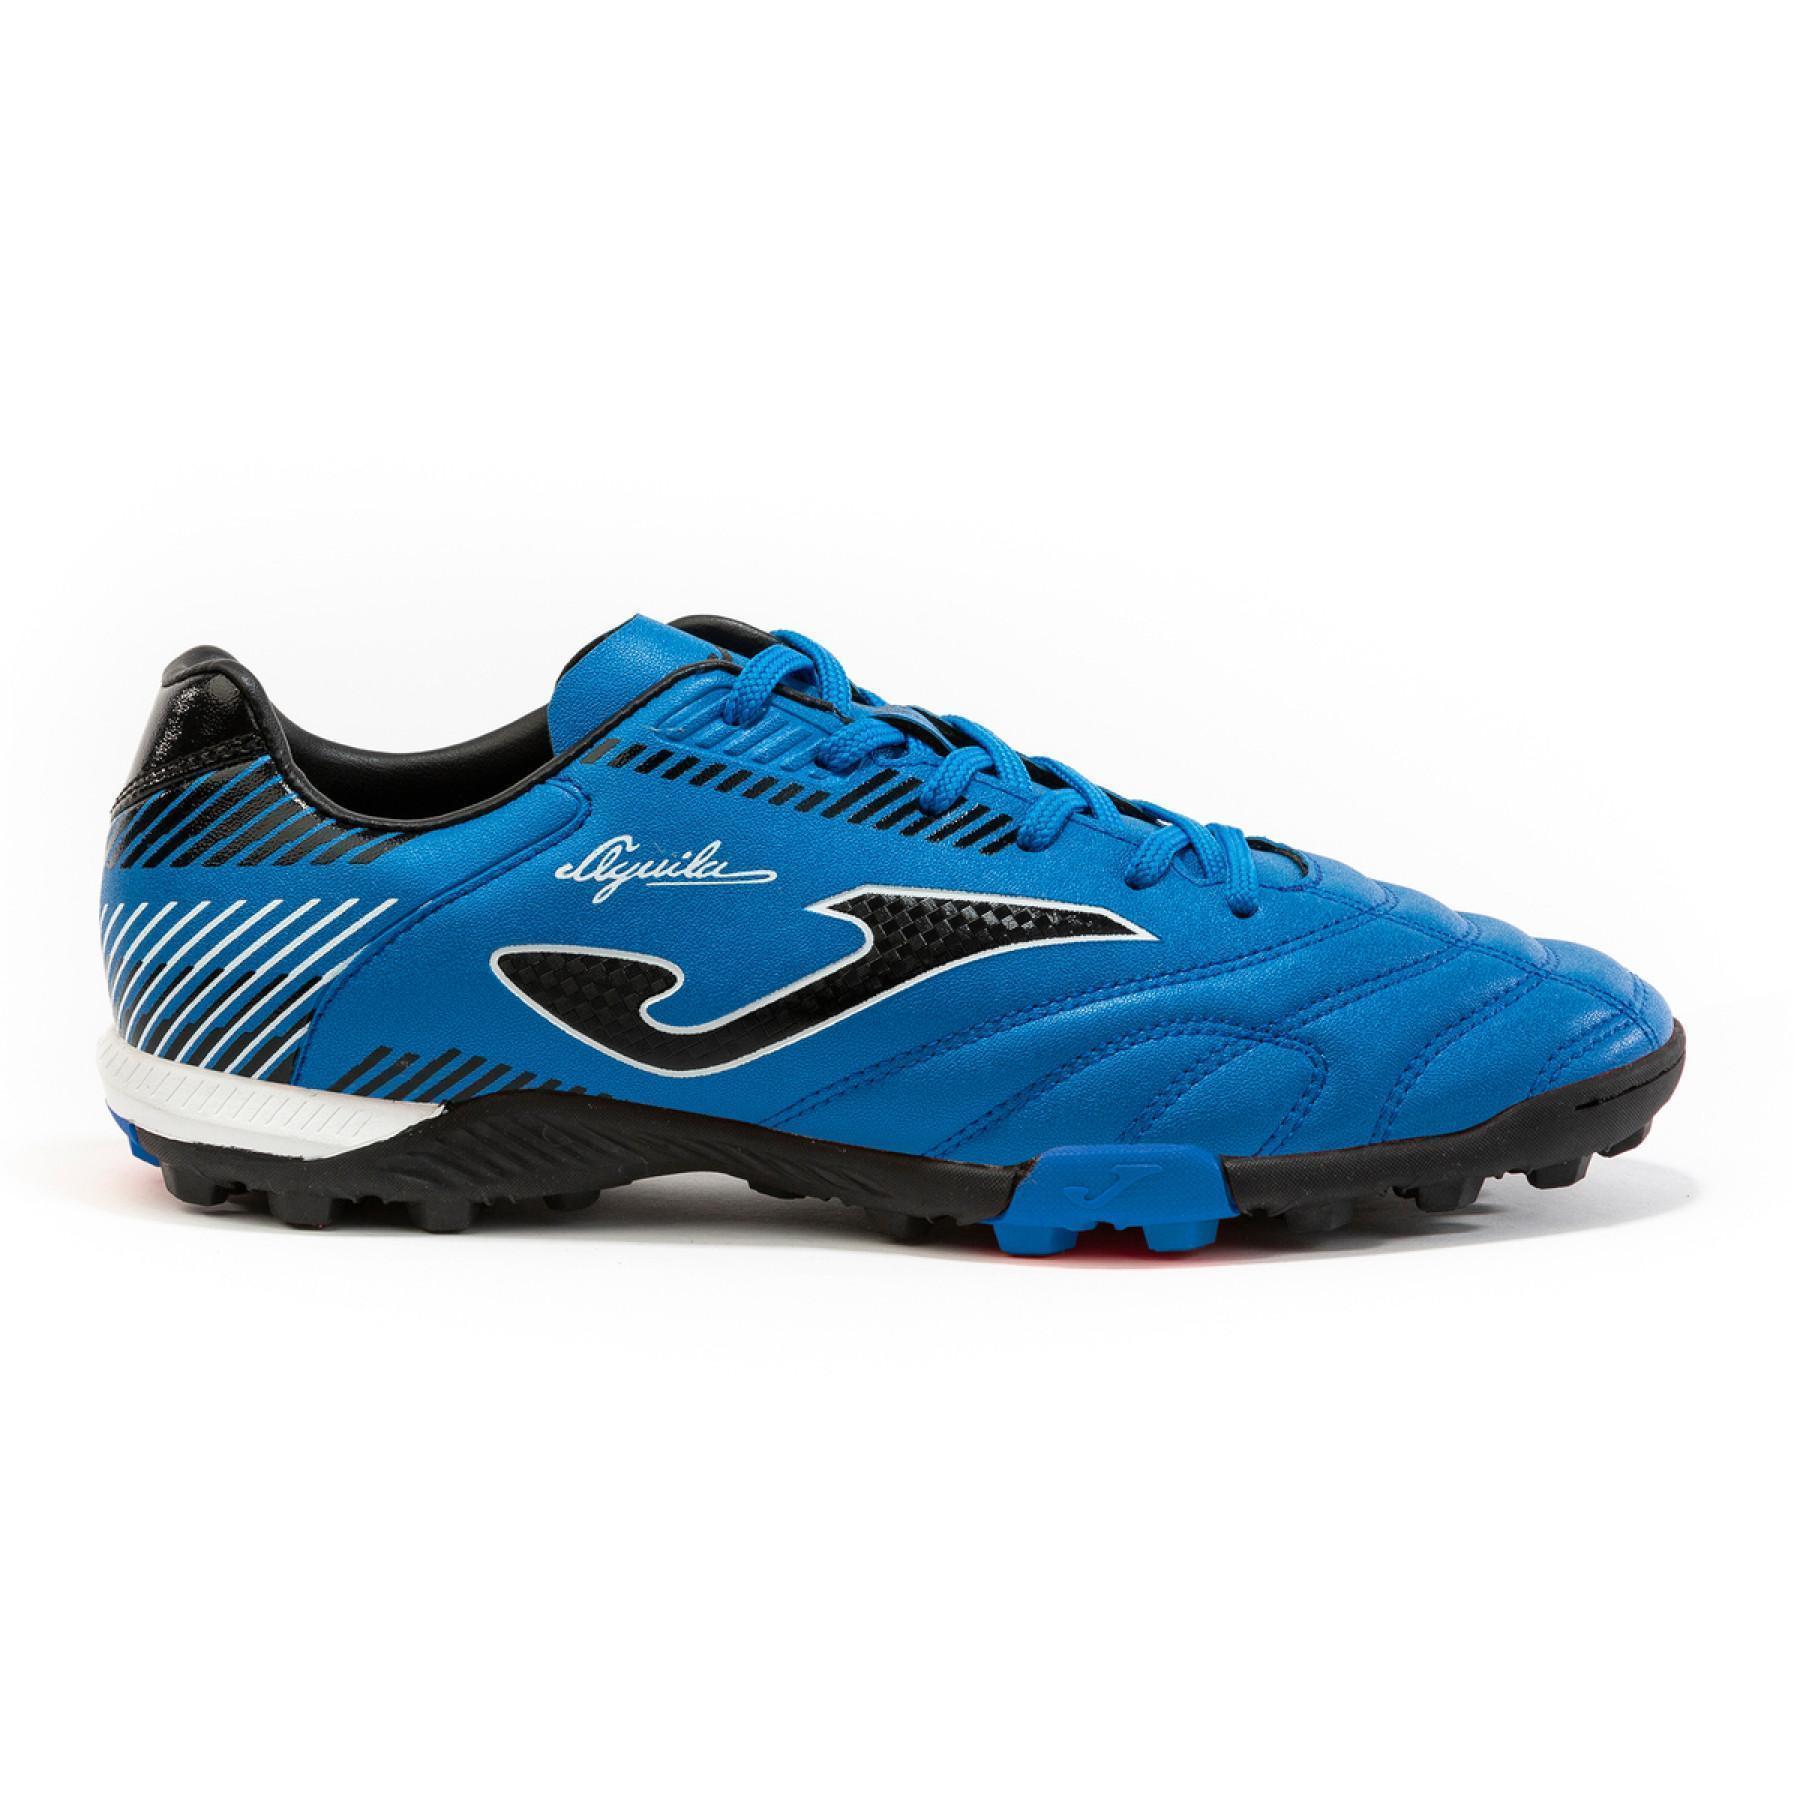 Chaussures Joma Aguila Turf 2004